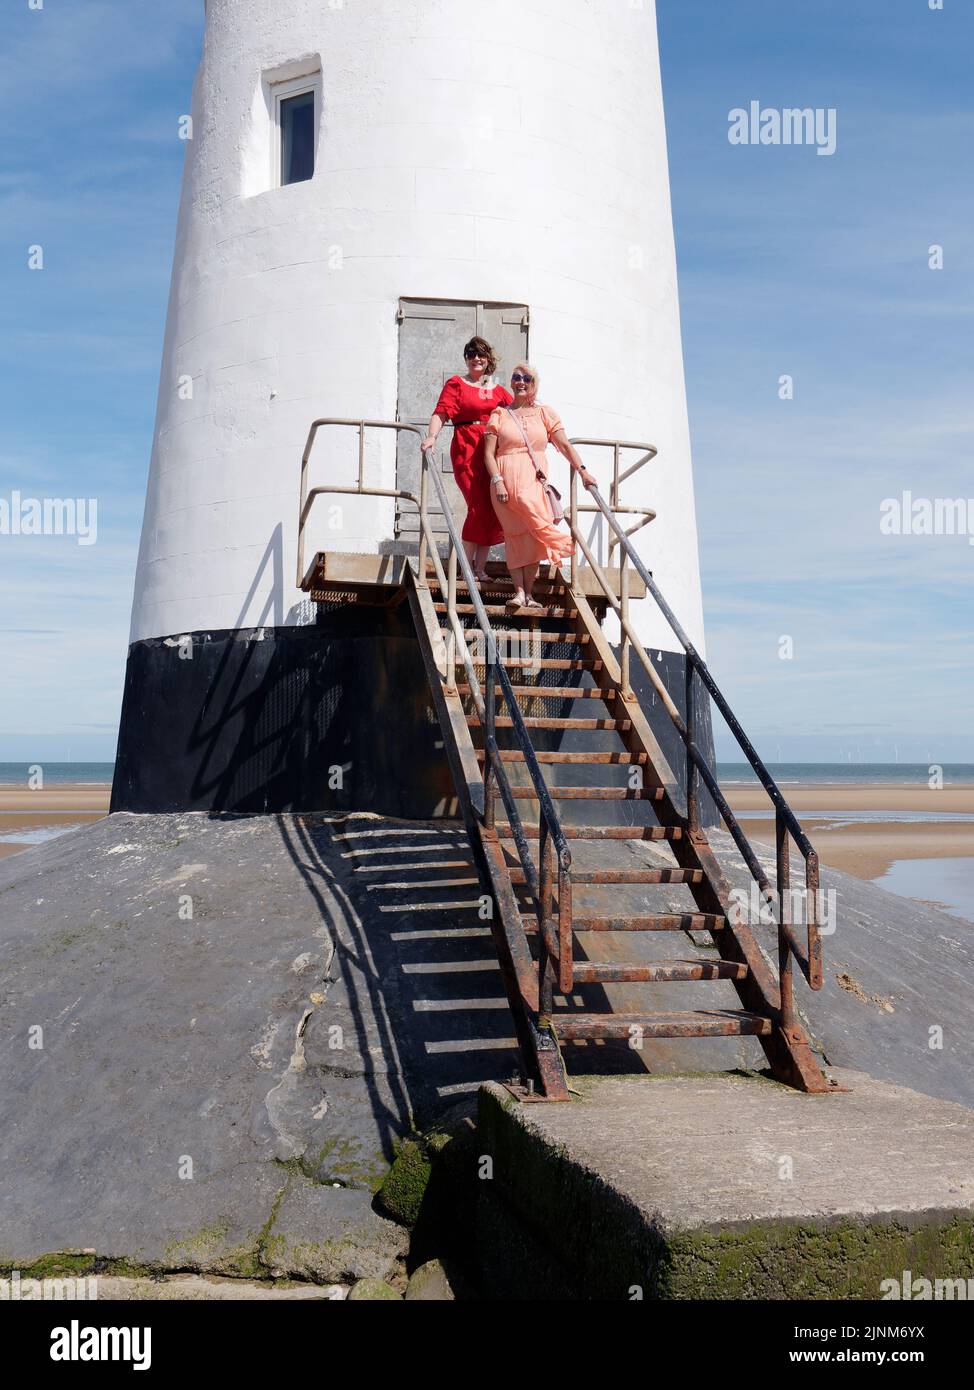 Talacre, Flintshire, Wales, Aug 07 2022: Point of Ayr Lighthouse aka Talacre Lighthouse, a Grade II listed building situated on the beach. Two elegant Stock Photo